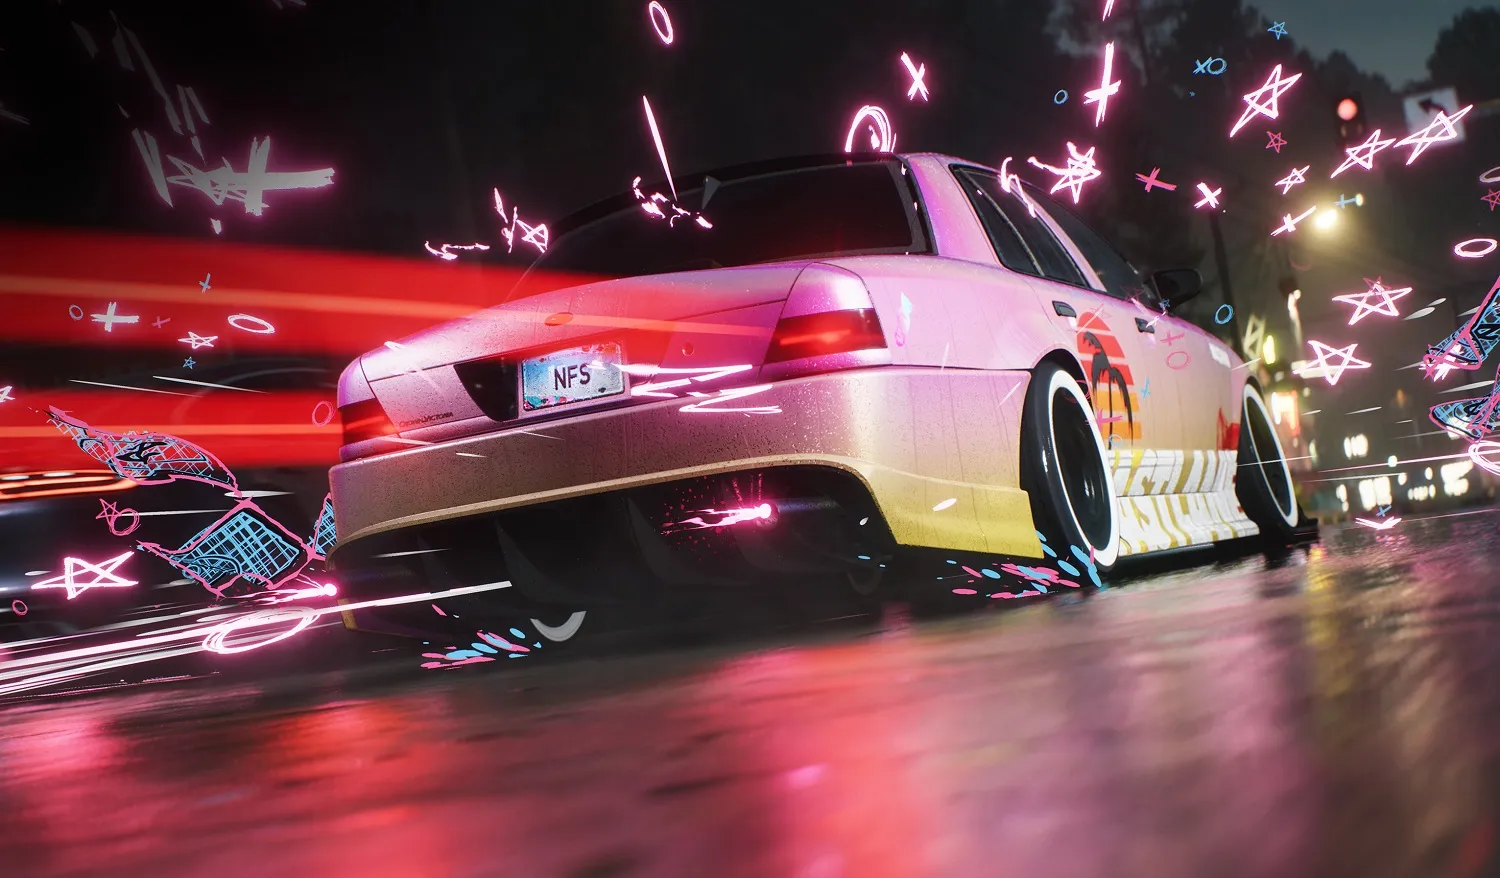 Fan-Made Need For Speed: Underground Remaster Looks Amazing